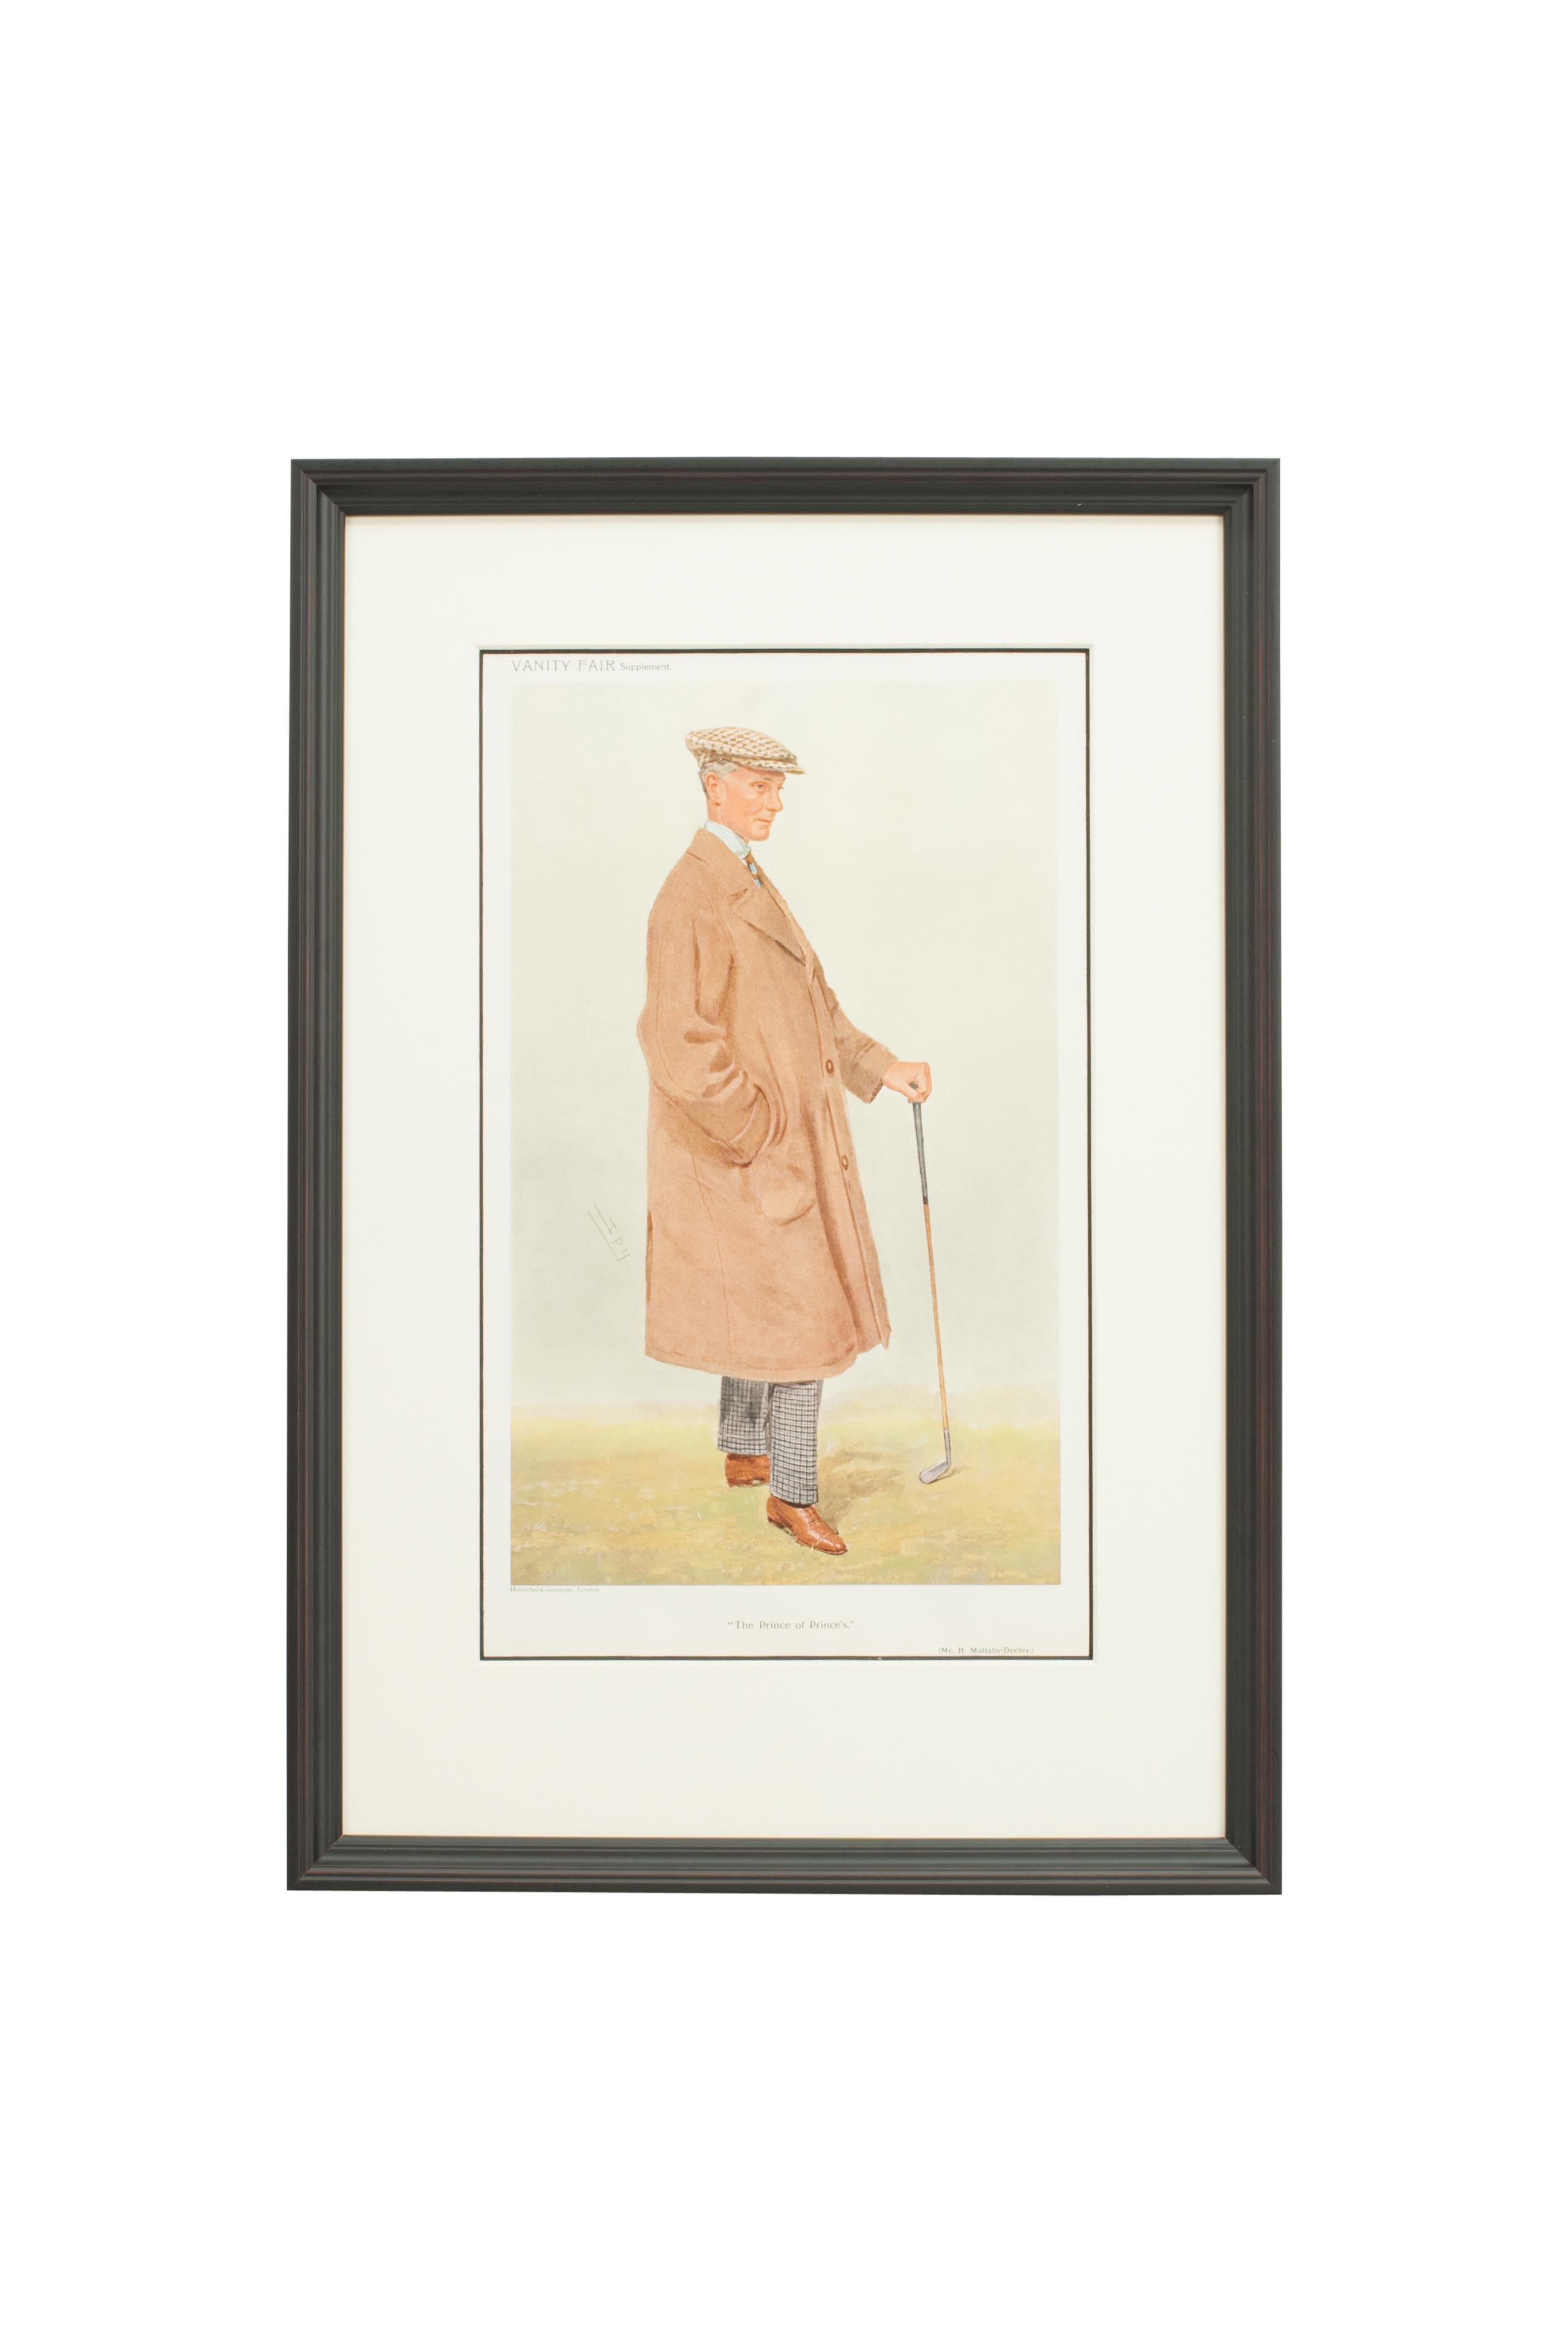 Vintage Vanity Fair Golf Pictures, Sir Leslie Ward.
A set of seven framed Golfers taken from 'Vanity Fair'. All but one of the supplements is taken from 'Vanity Fair', the single one (The Right Honorable D. Lloyd George) is from 'The World'. The